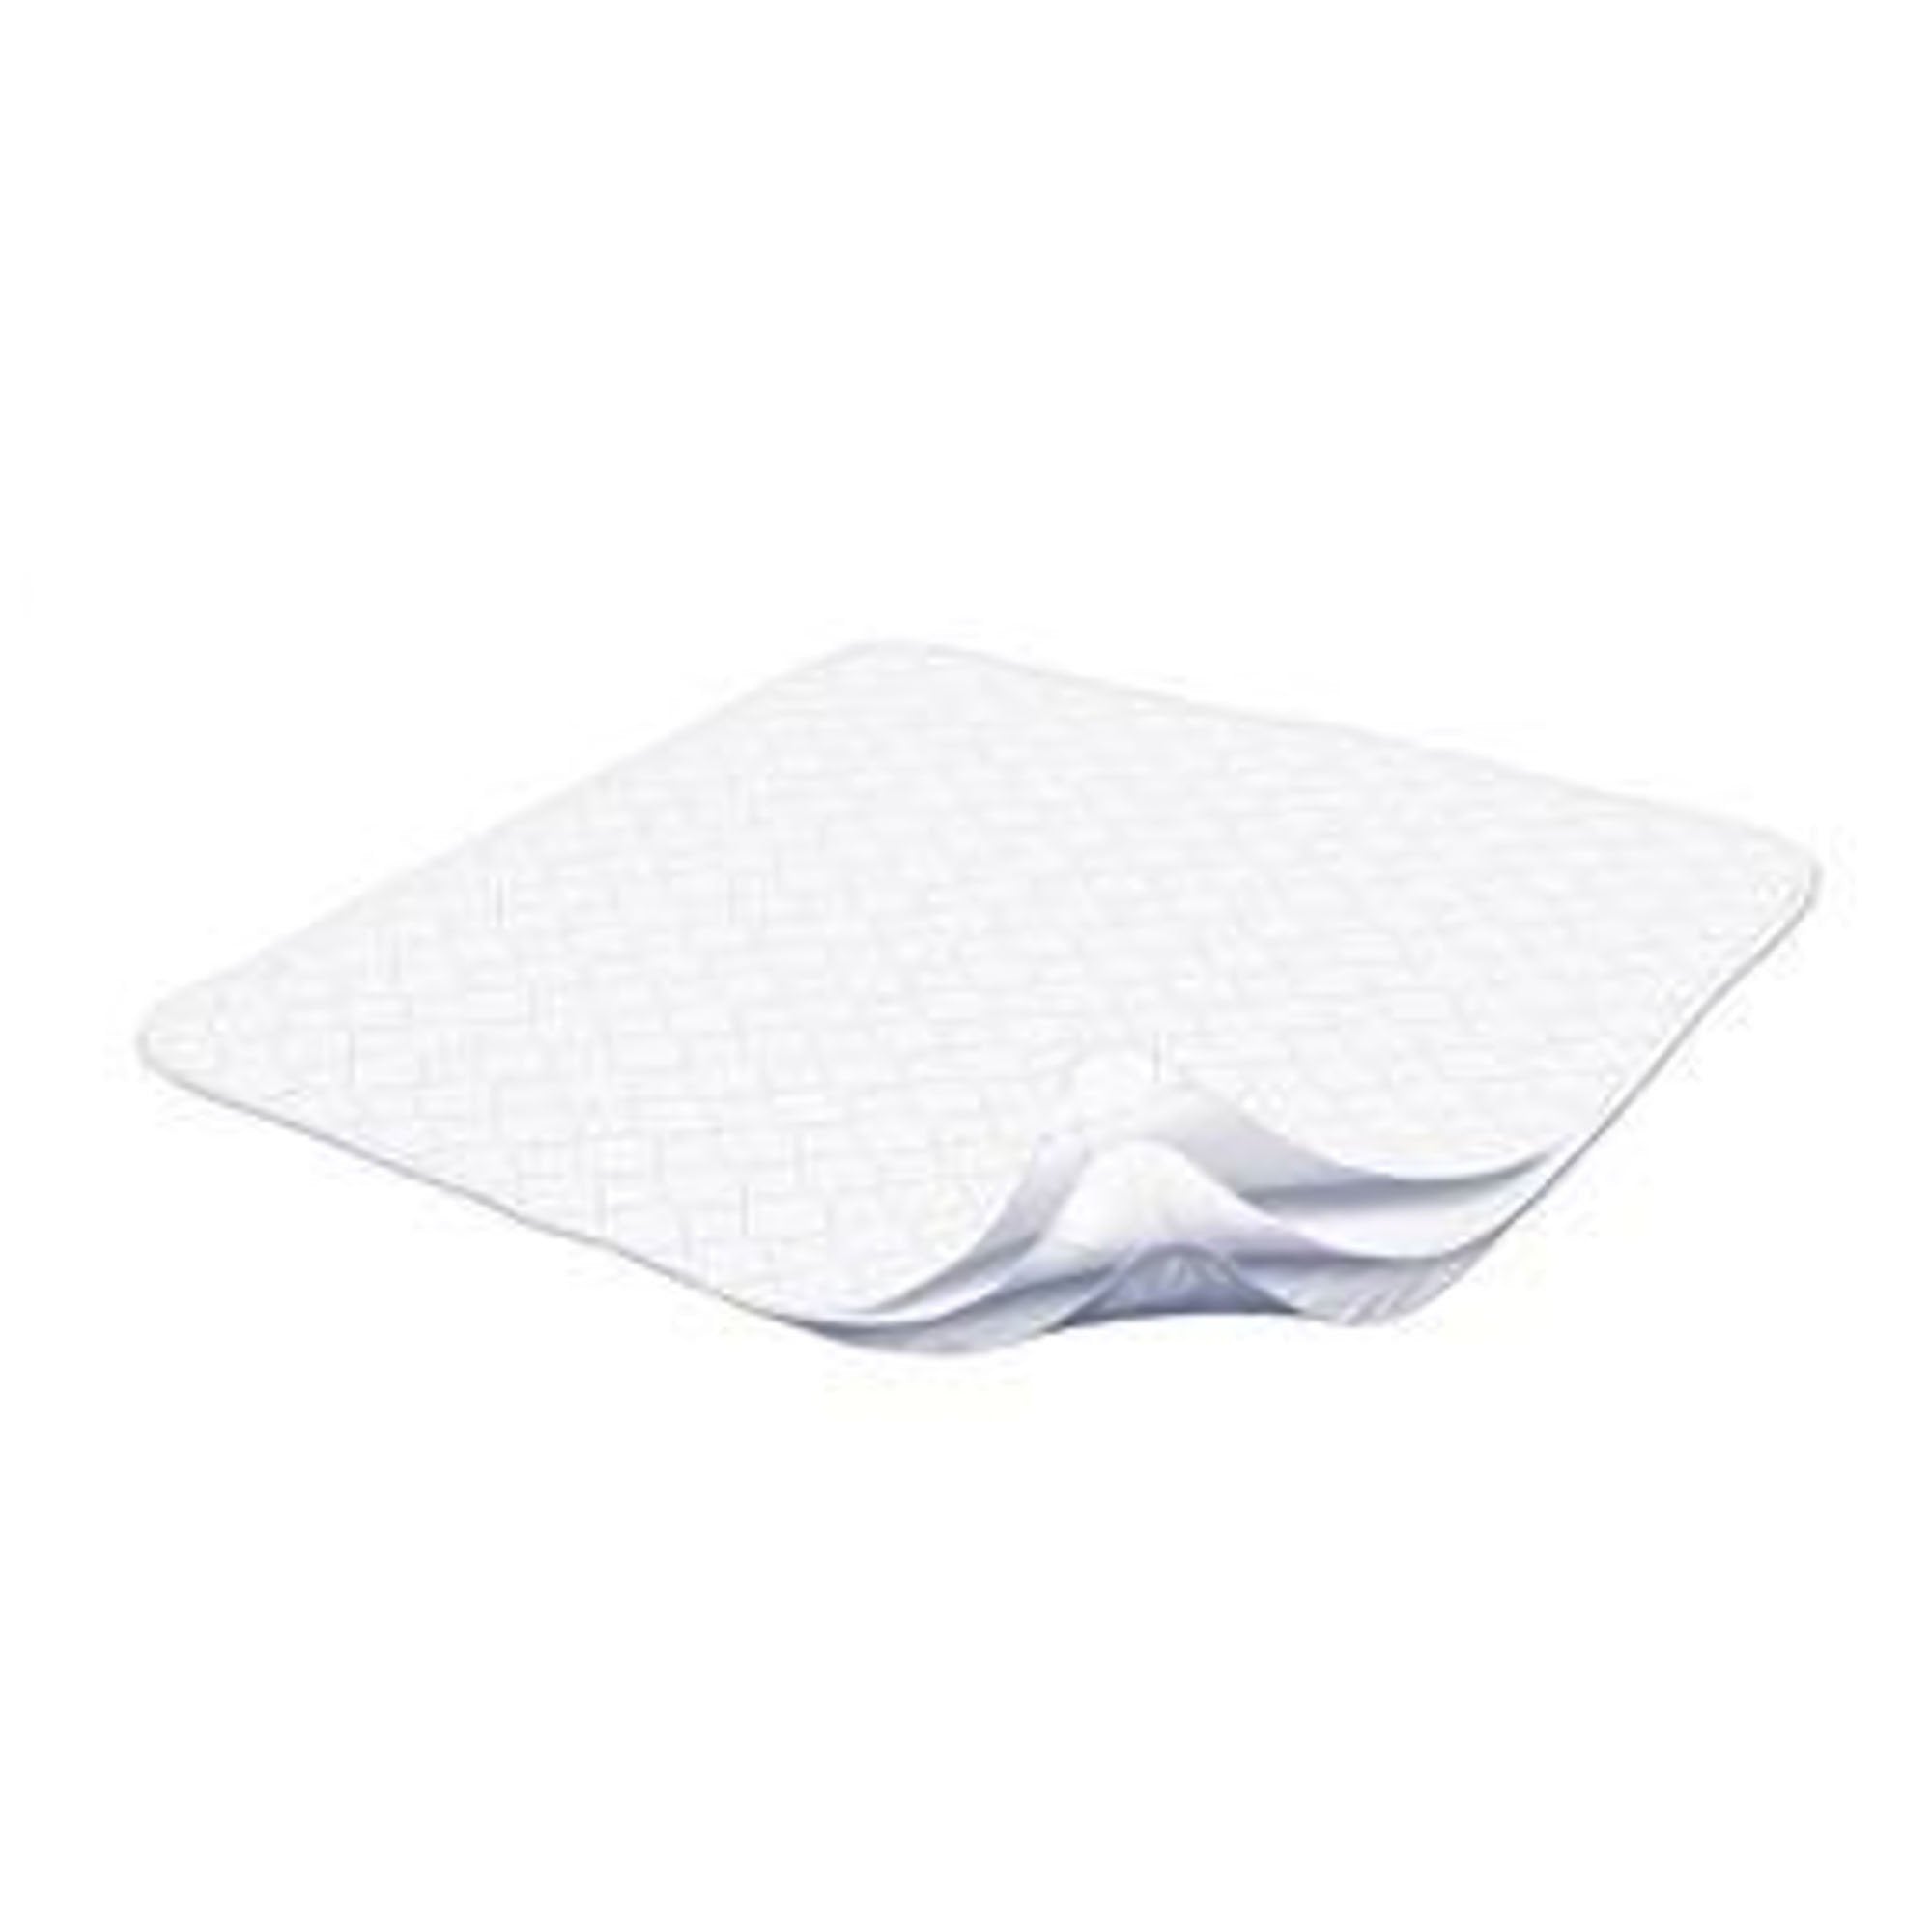 Reusable Underpad Dignity® Washable Sheet Protector 35 X 72 Inch Cotton Moderate Absorbency